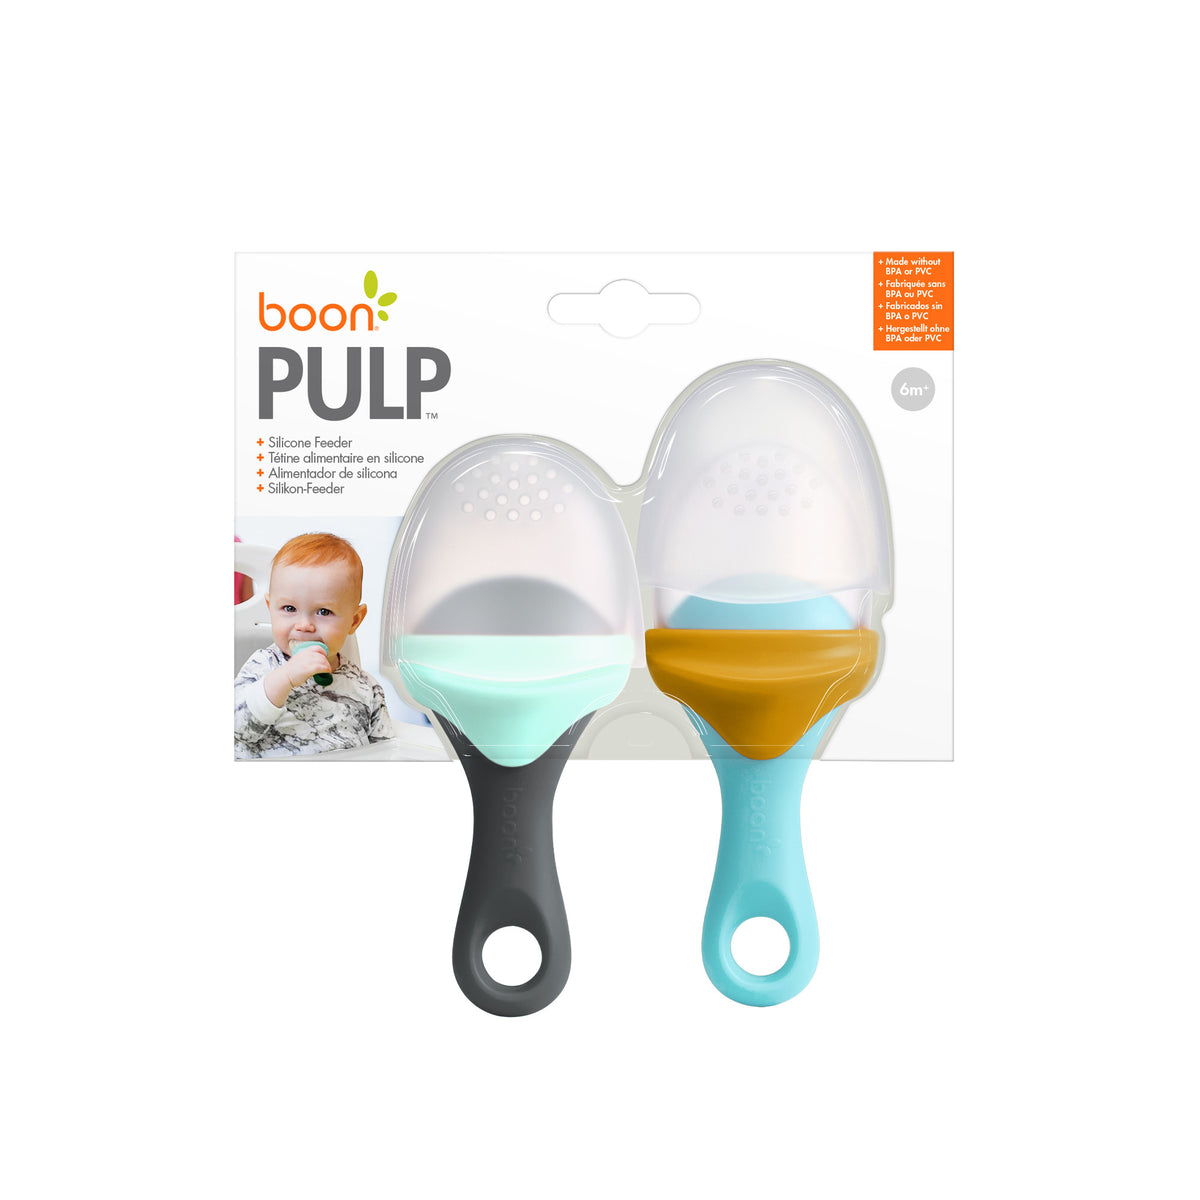 Boon Pulp Baby Feeder - How To Assemble & Use 